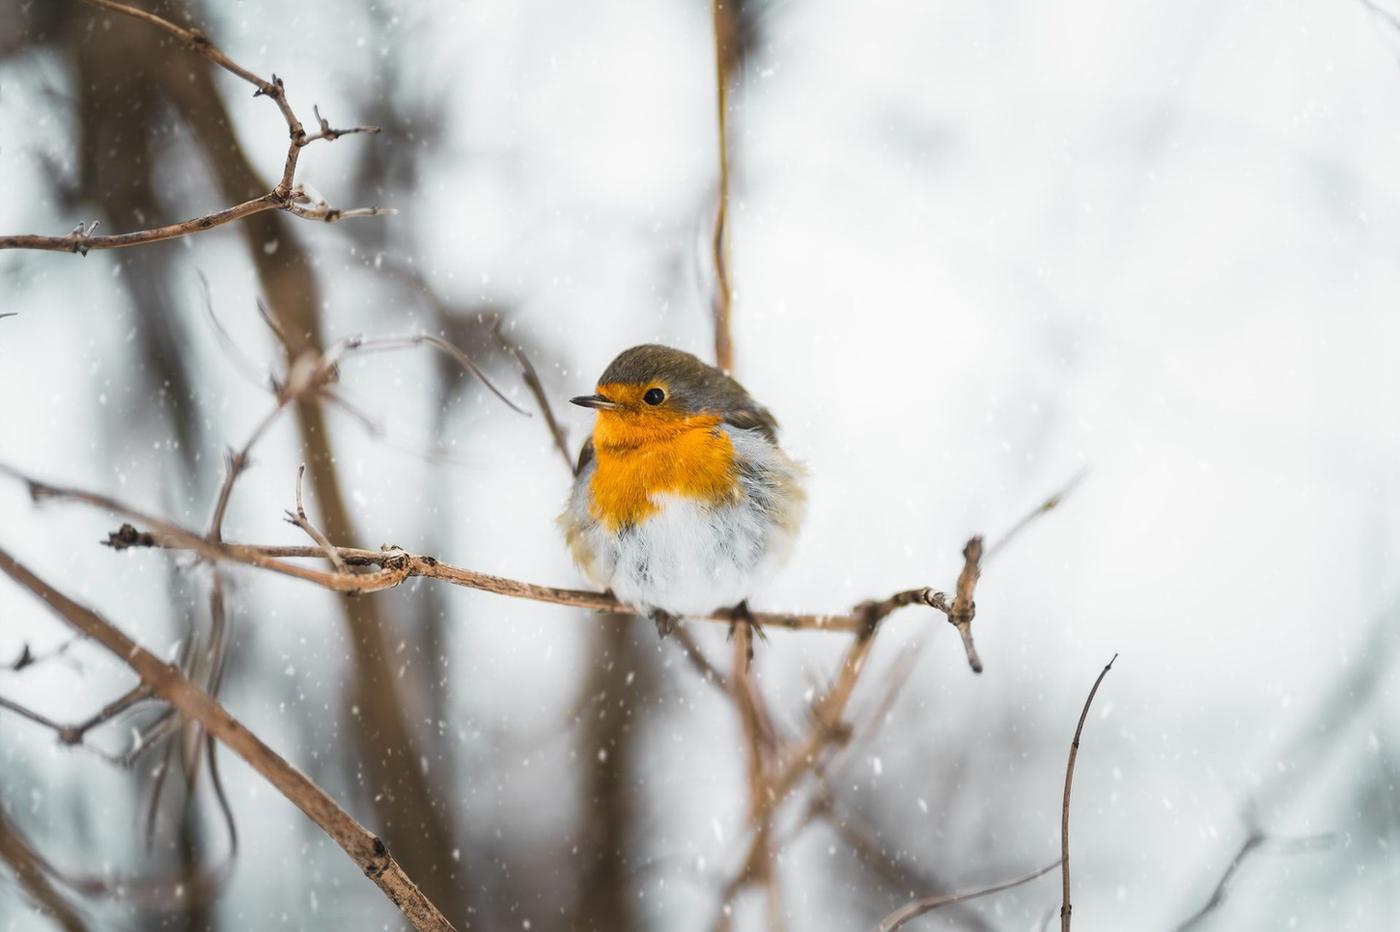 Normally in the wild, you will see a robin sitting on the branch of a tree looking for food or feeding its young ones.